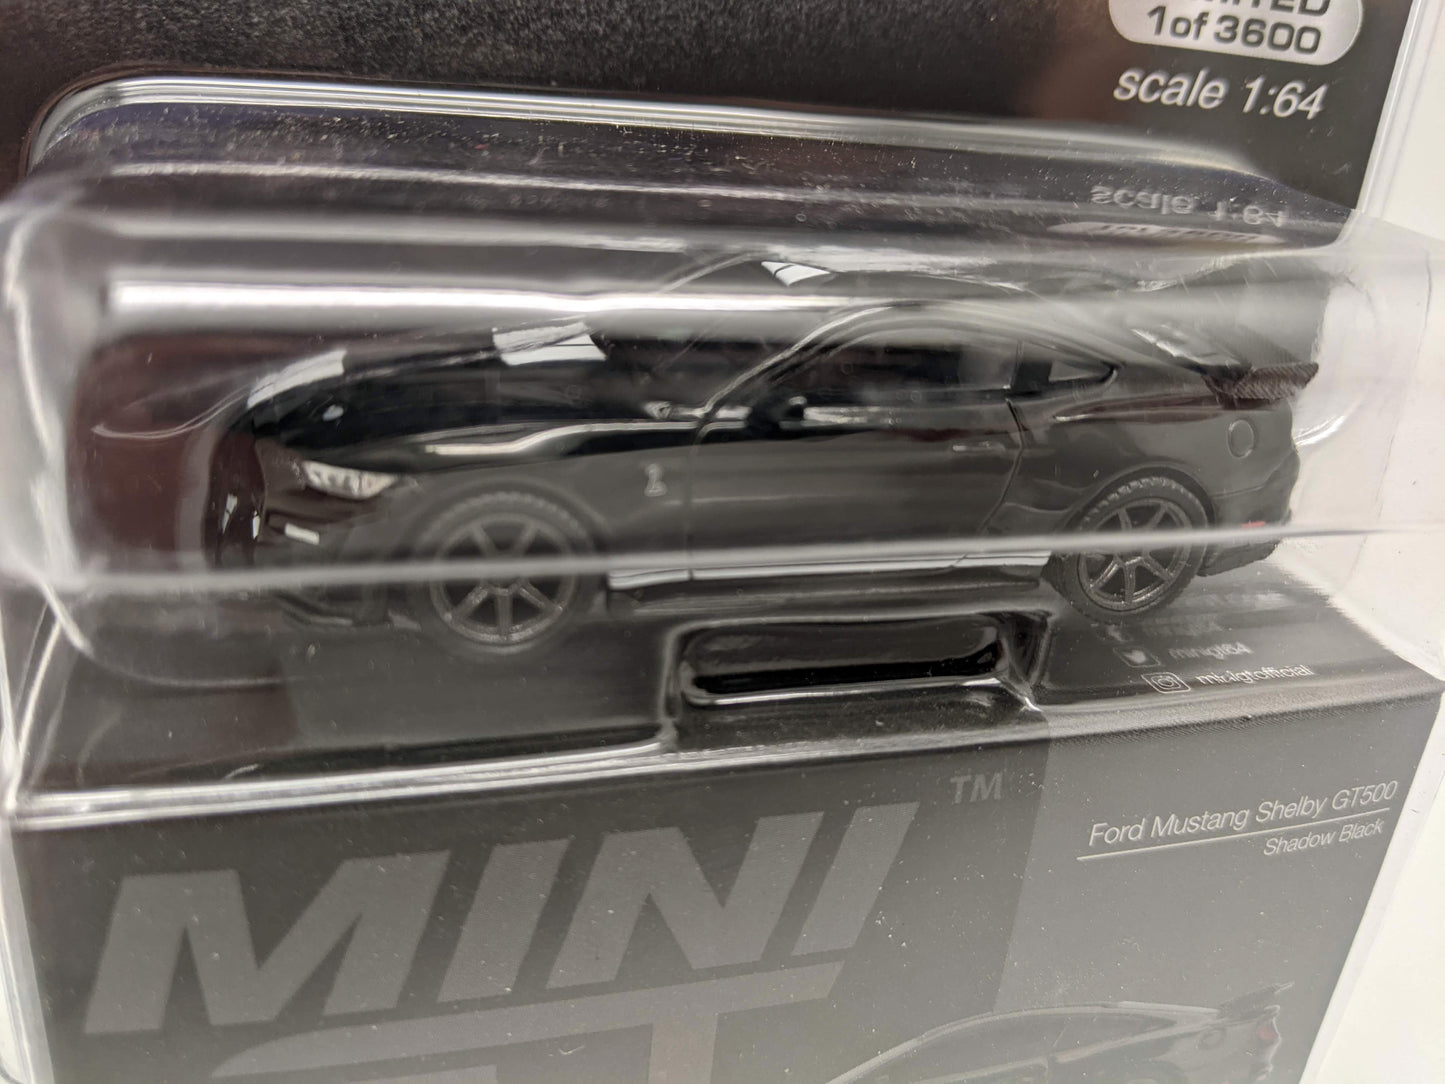 Mini GT 0334 - Ford Mustang Shelby GT500 - Shadow Black